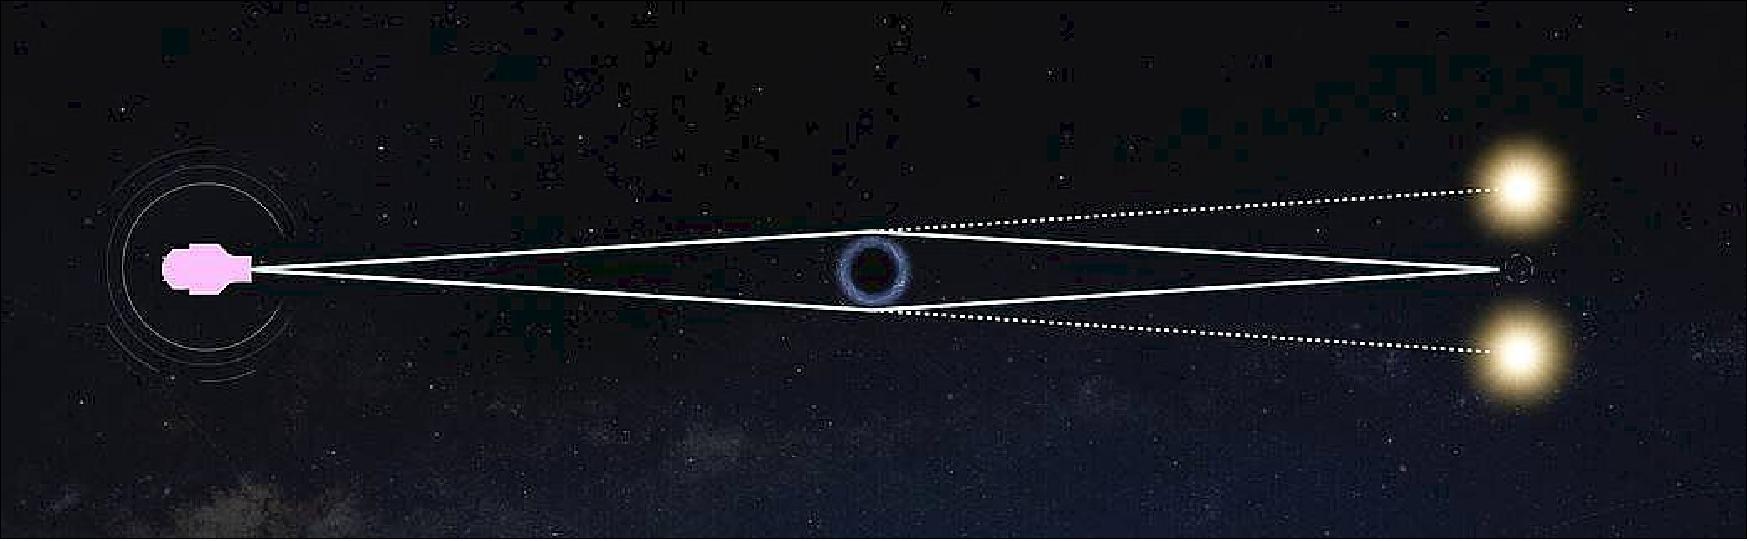 Figure 20: This illustration shows the concept of gravitational microlensing with a black hole. When a black hole passes nearly in front of a more distant star, it can lens light from the star (image credit: NASA's Goddard Space Flight Center Conceptual Image Lab)